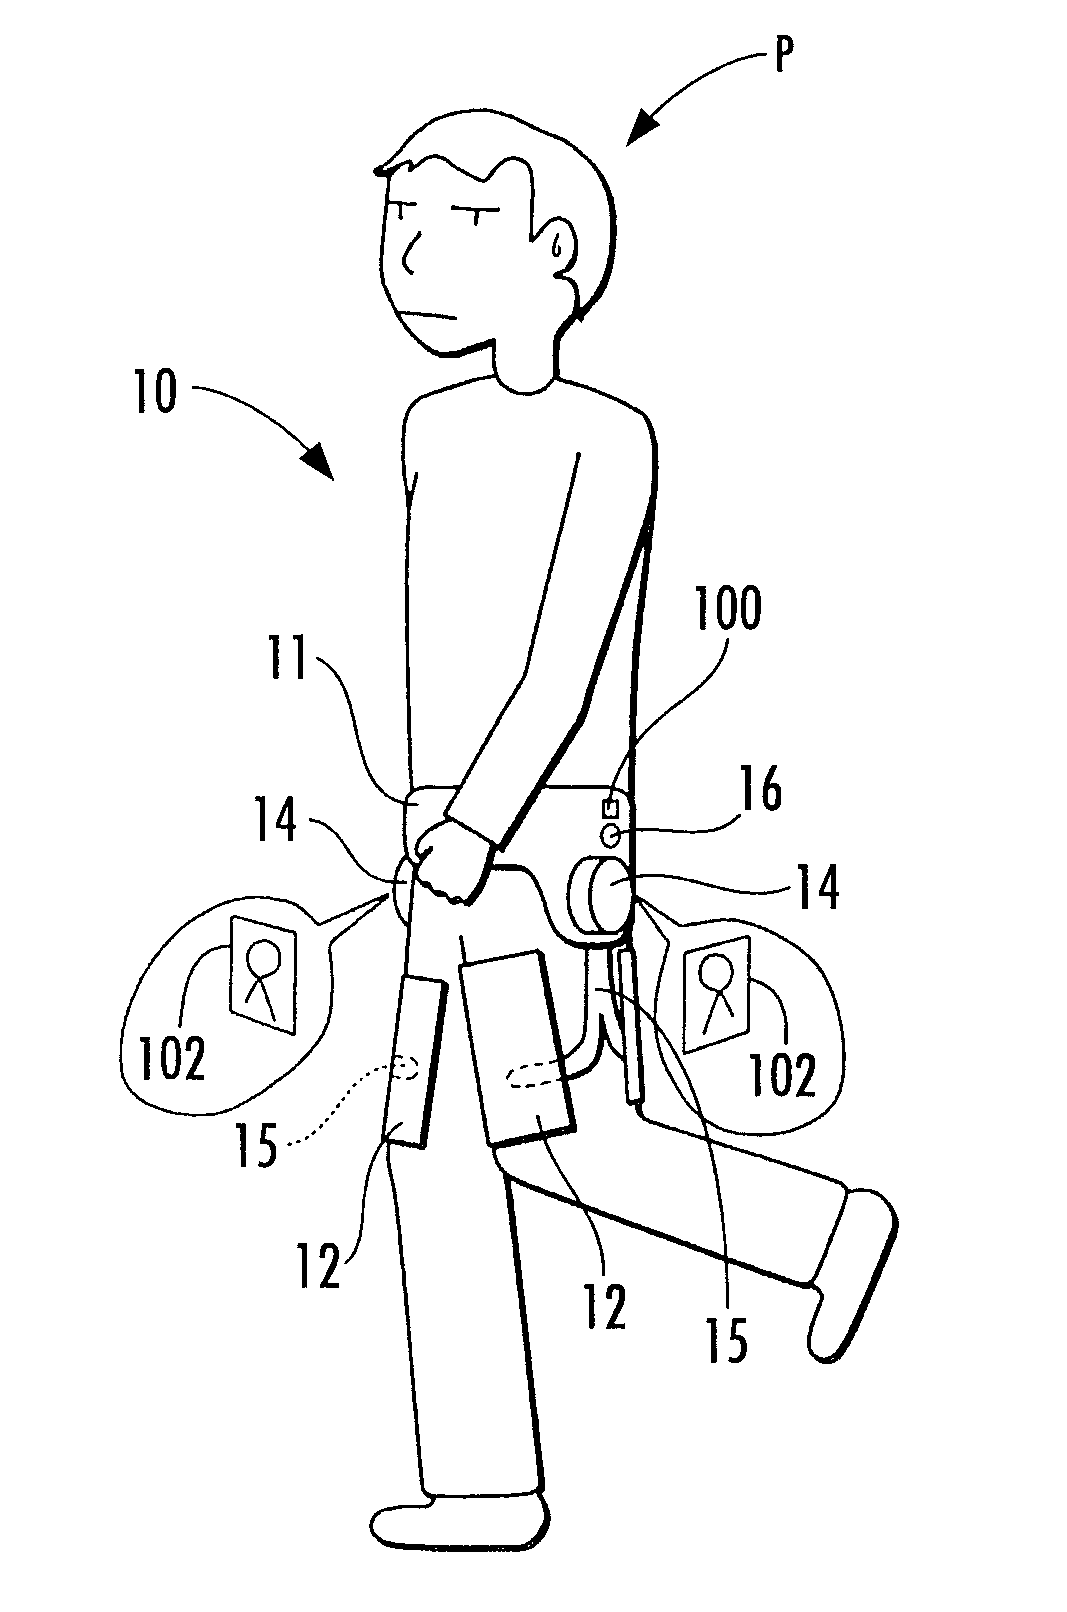 Motion assist device